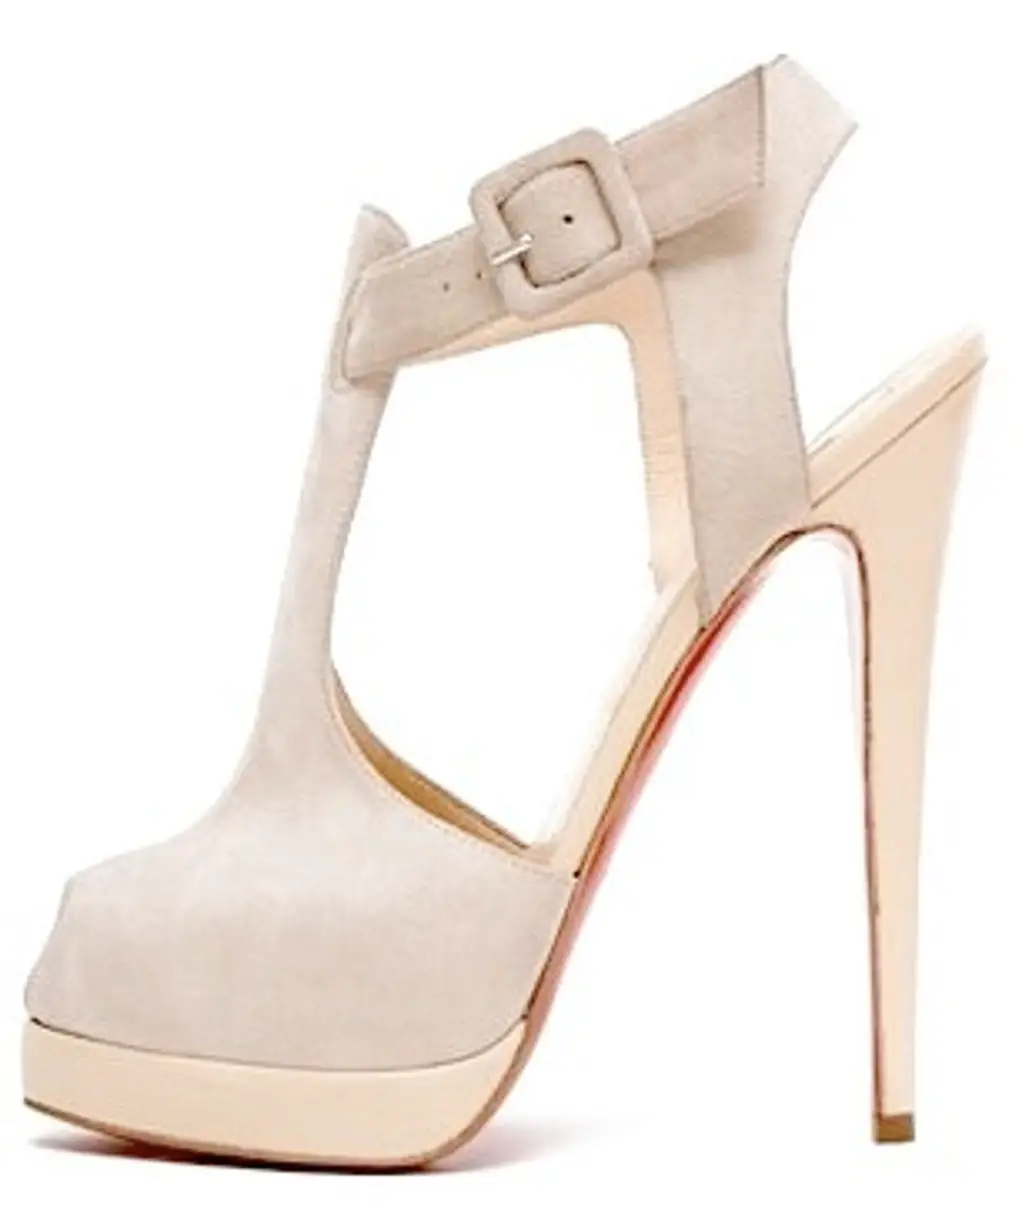 Suede and Patent Leather Platform Sandals by Christian Louboutin